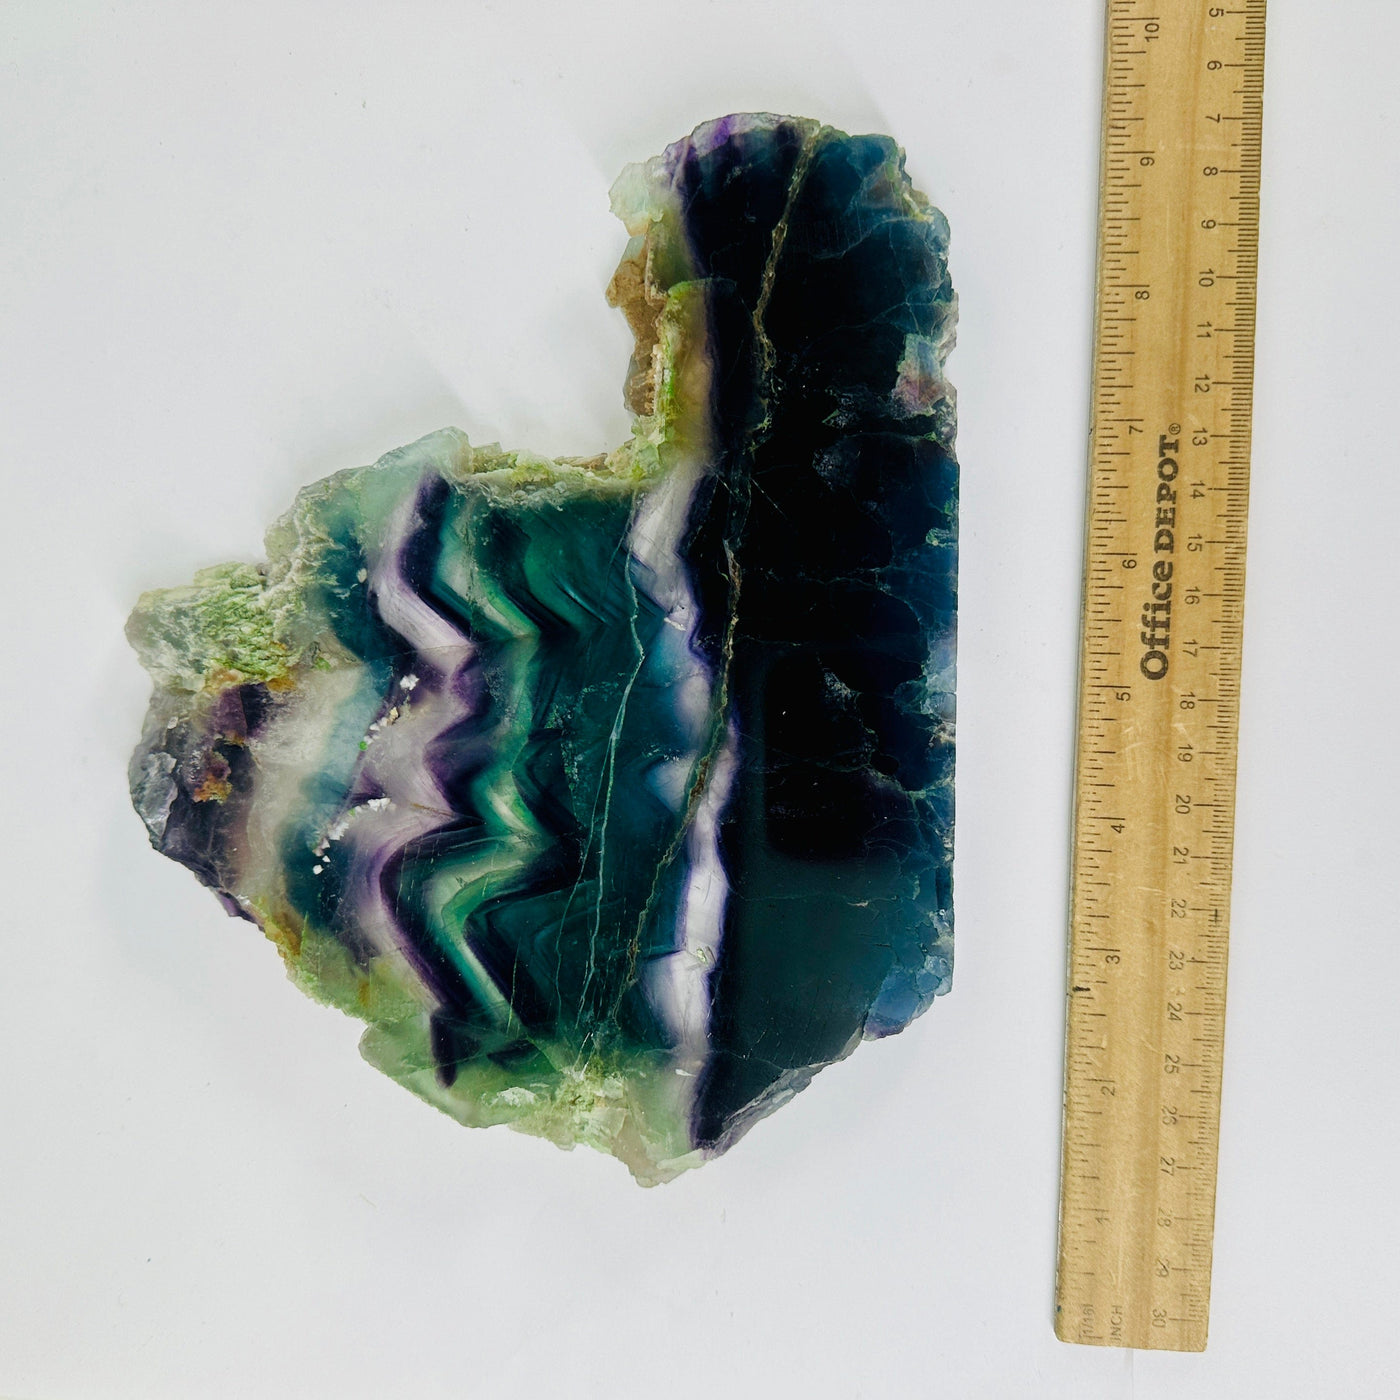 Rainbow Fluorite AA Grade Slab - Large Crystal Slab - You Choose - variant 5 with ruler for size reference